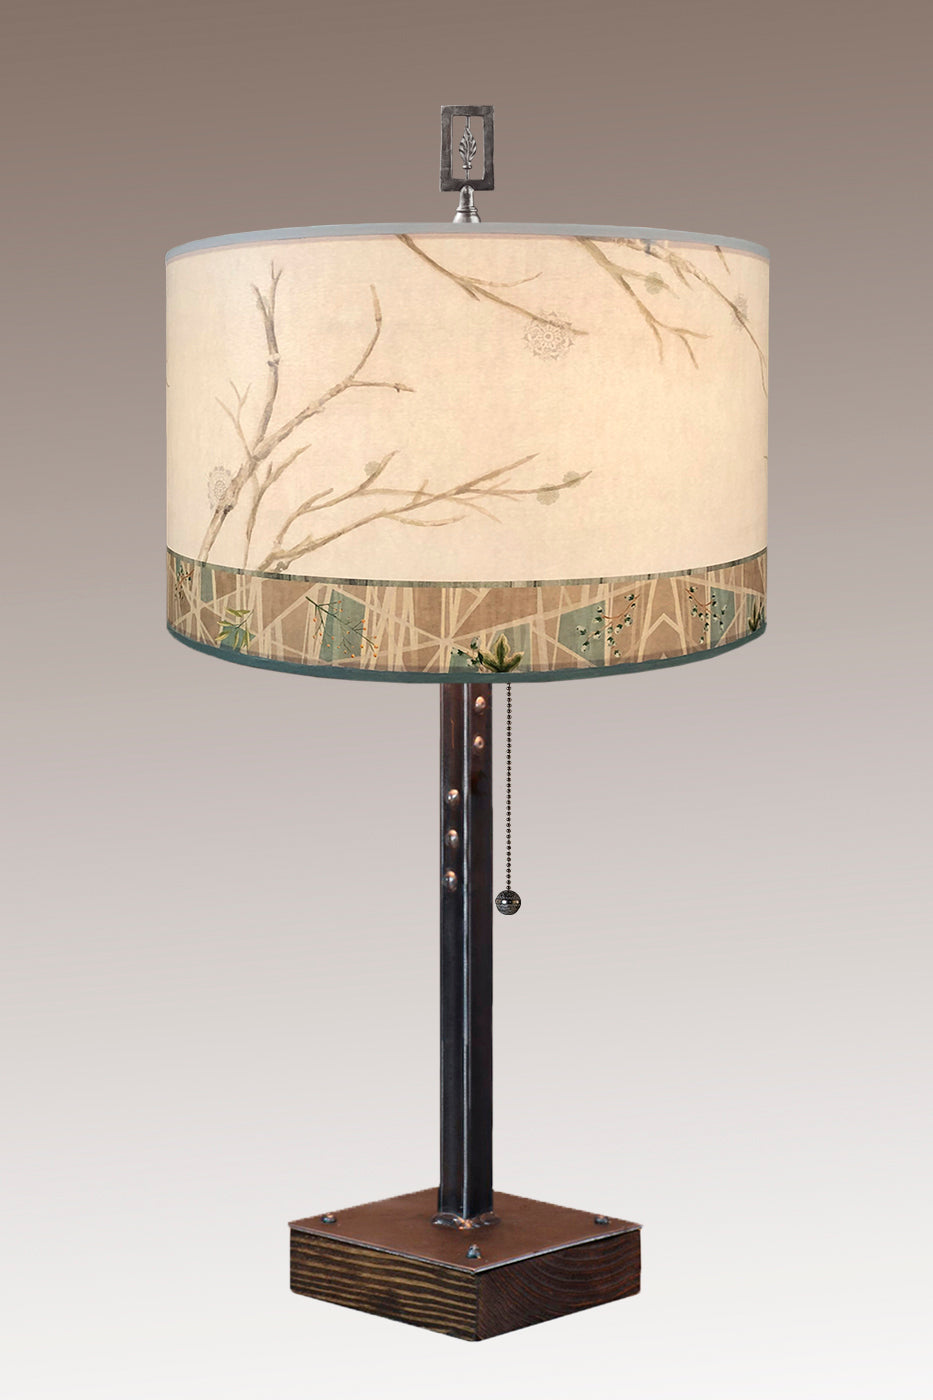 Steel Table Lamp on Wood with Large Drum Shade in Prism Branch